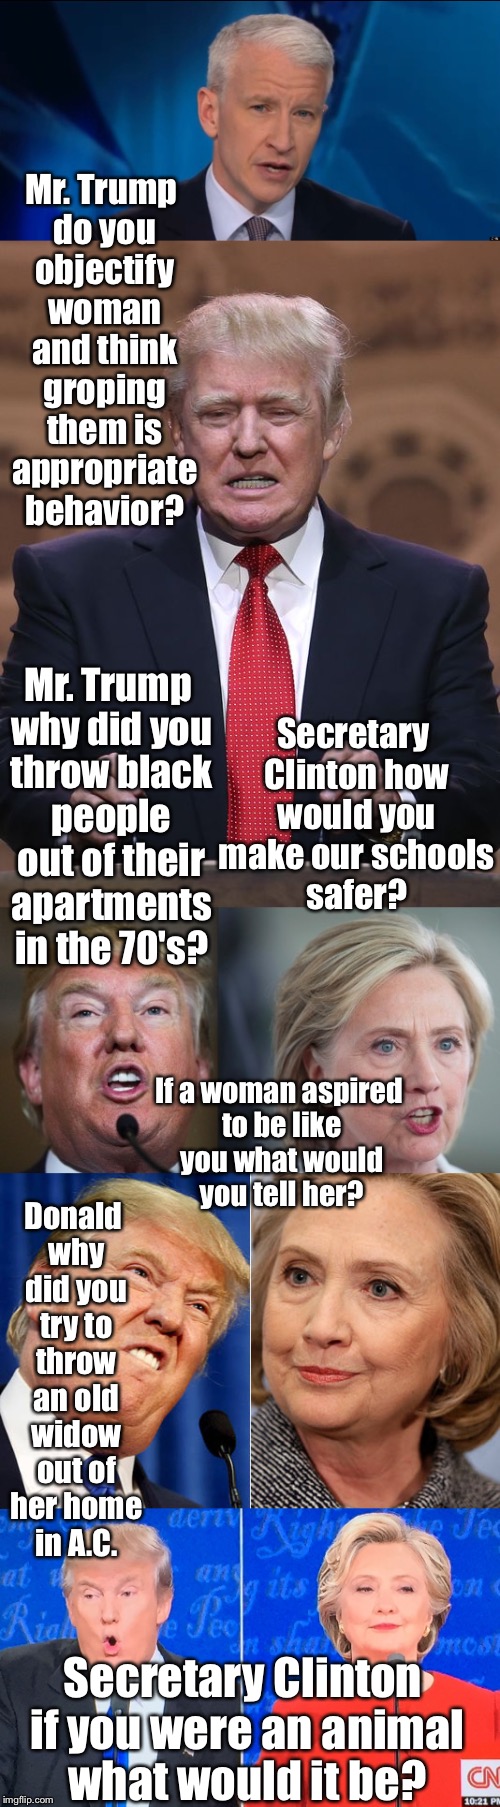 Anderson Cooper grills the Party Nominees  | Mr. Trump do you objectify woman and think groping them is appropriate behavior? Mr. Trump why did you throw black people out of their apartments in the 70's? Secretary Clinton how would you make our schools safer? If a woman aspired to be like you what would you tell her? Donald why did you try to throw an old widow out of her home in A.C. Secretary Clinton if you were an animal what would it be? | image tagged in anderson cooper,presidential debate,donald trump,hillary clinton,media bias | made w/ Imgflip meme maker